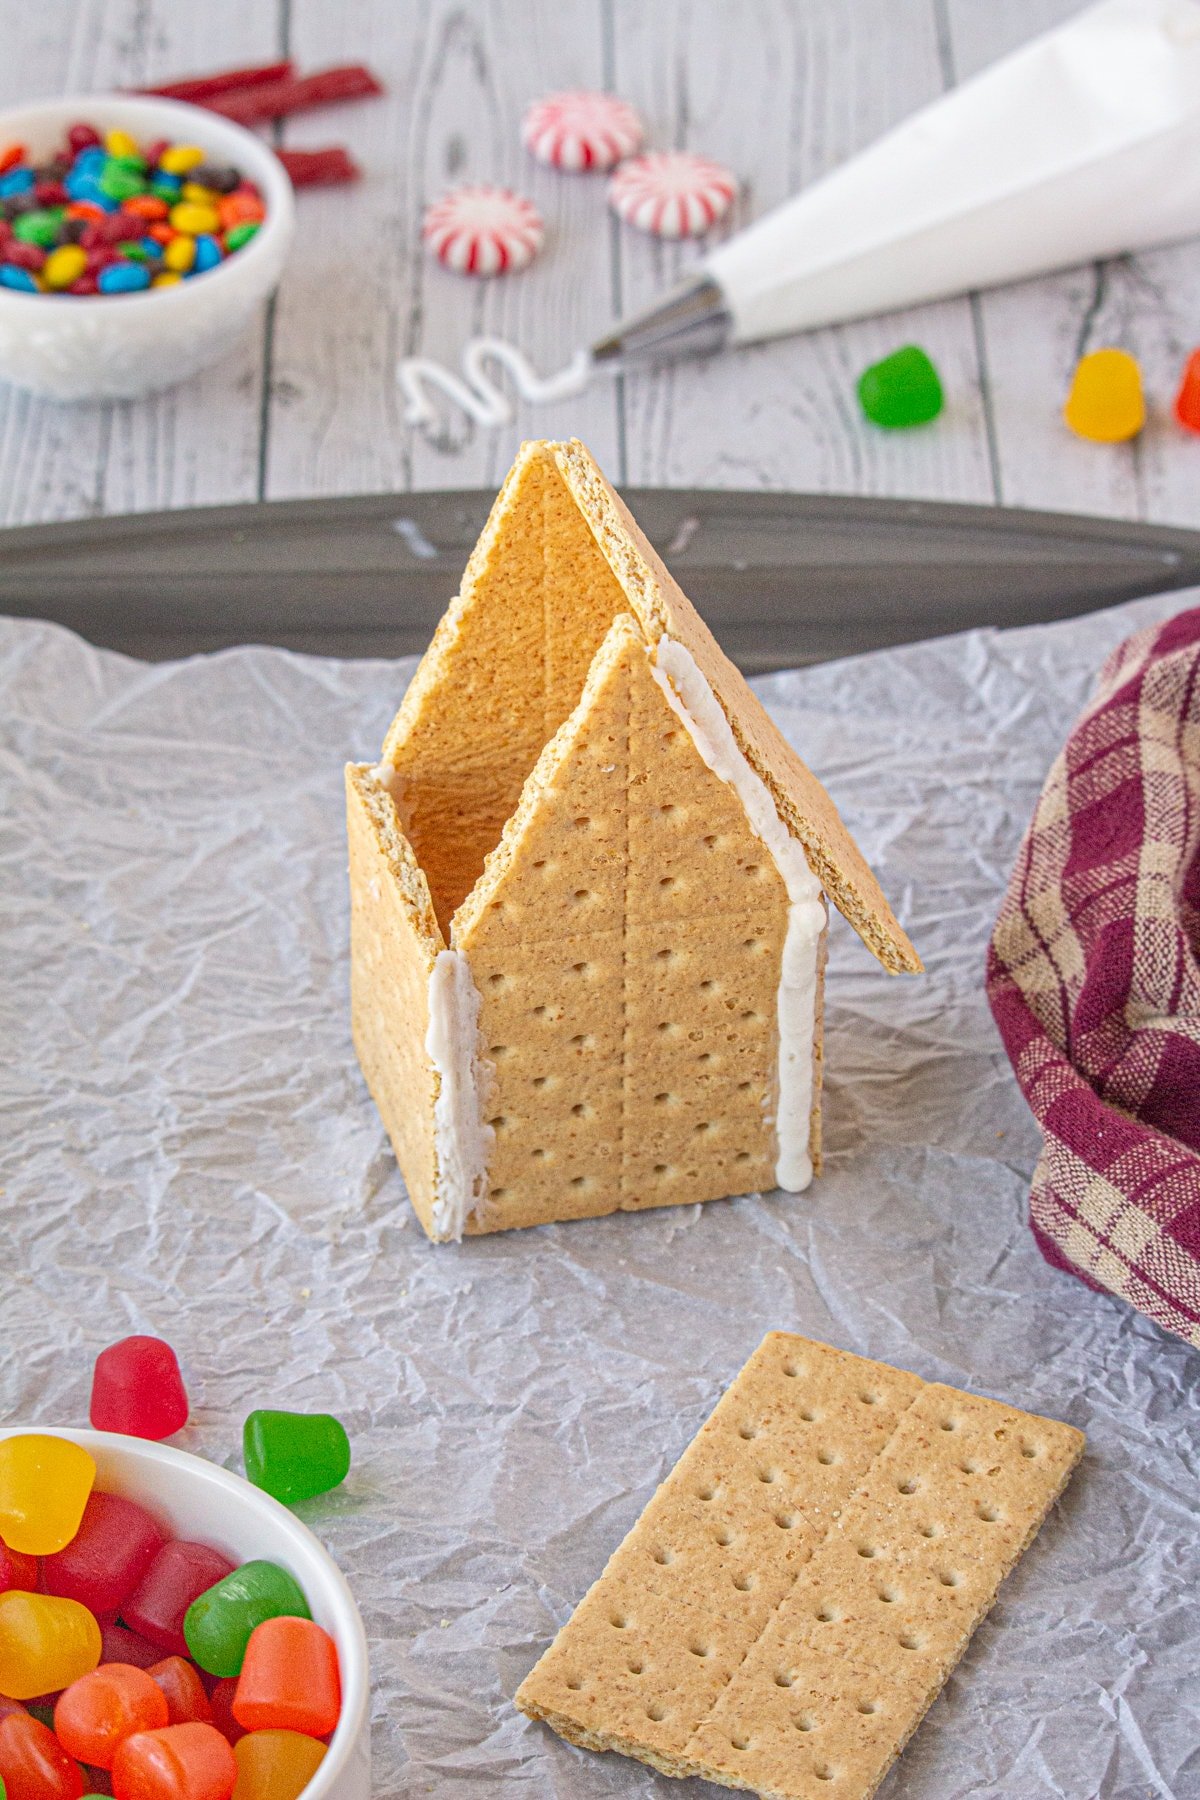 Press it on the angled side of the tall graham cracker. Hold for a few seconds.